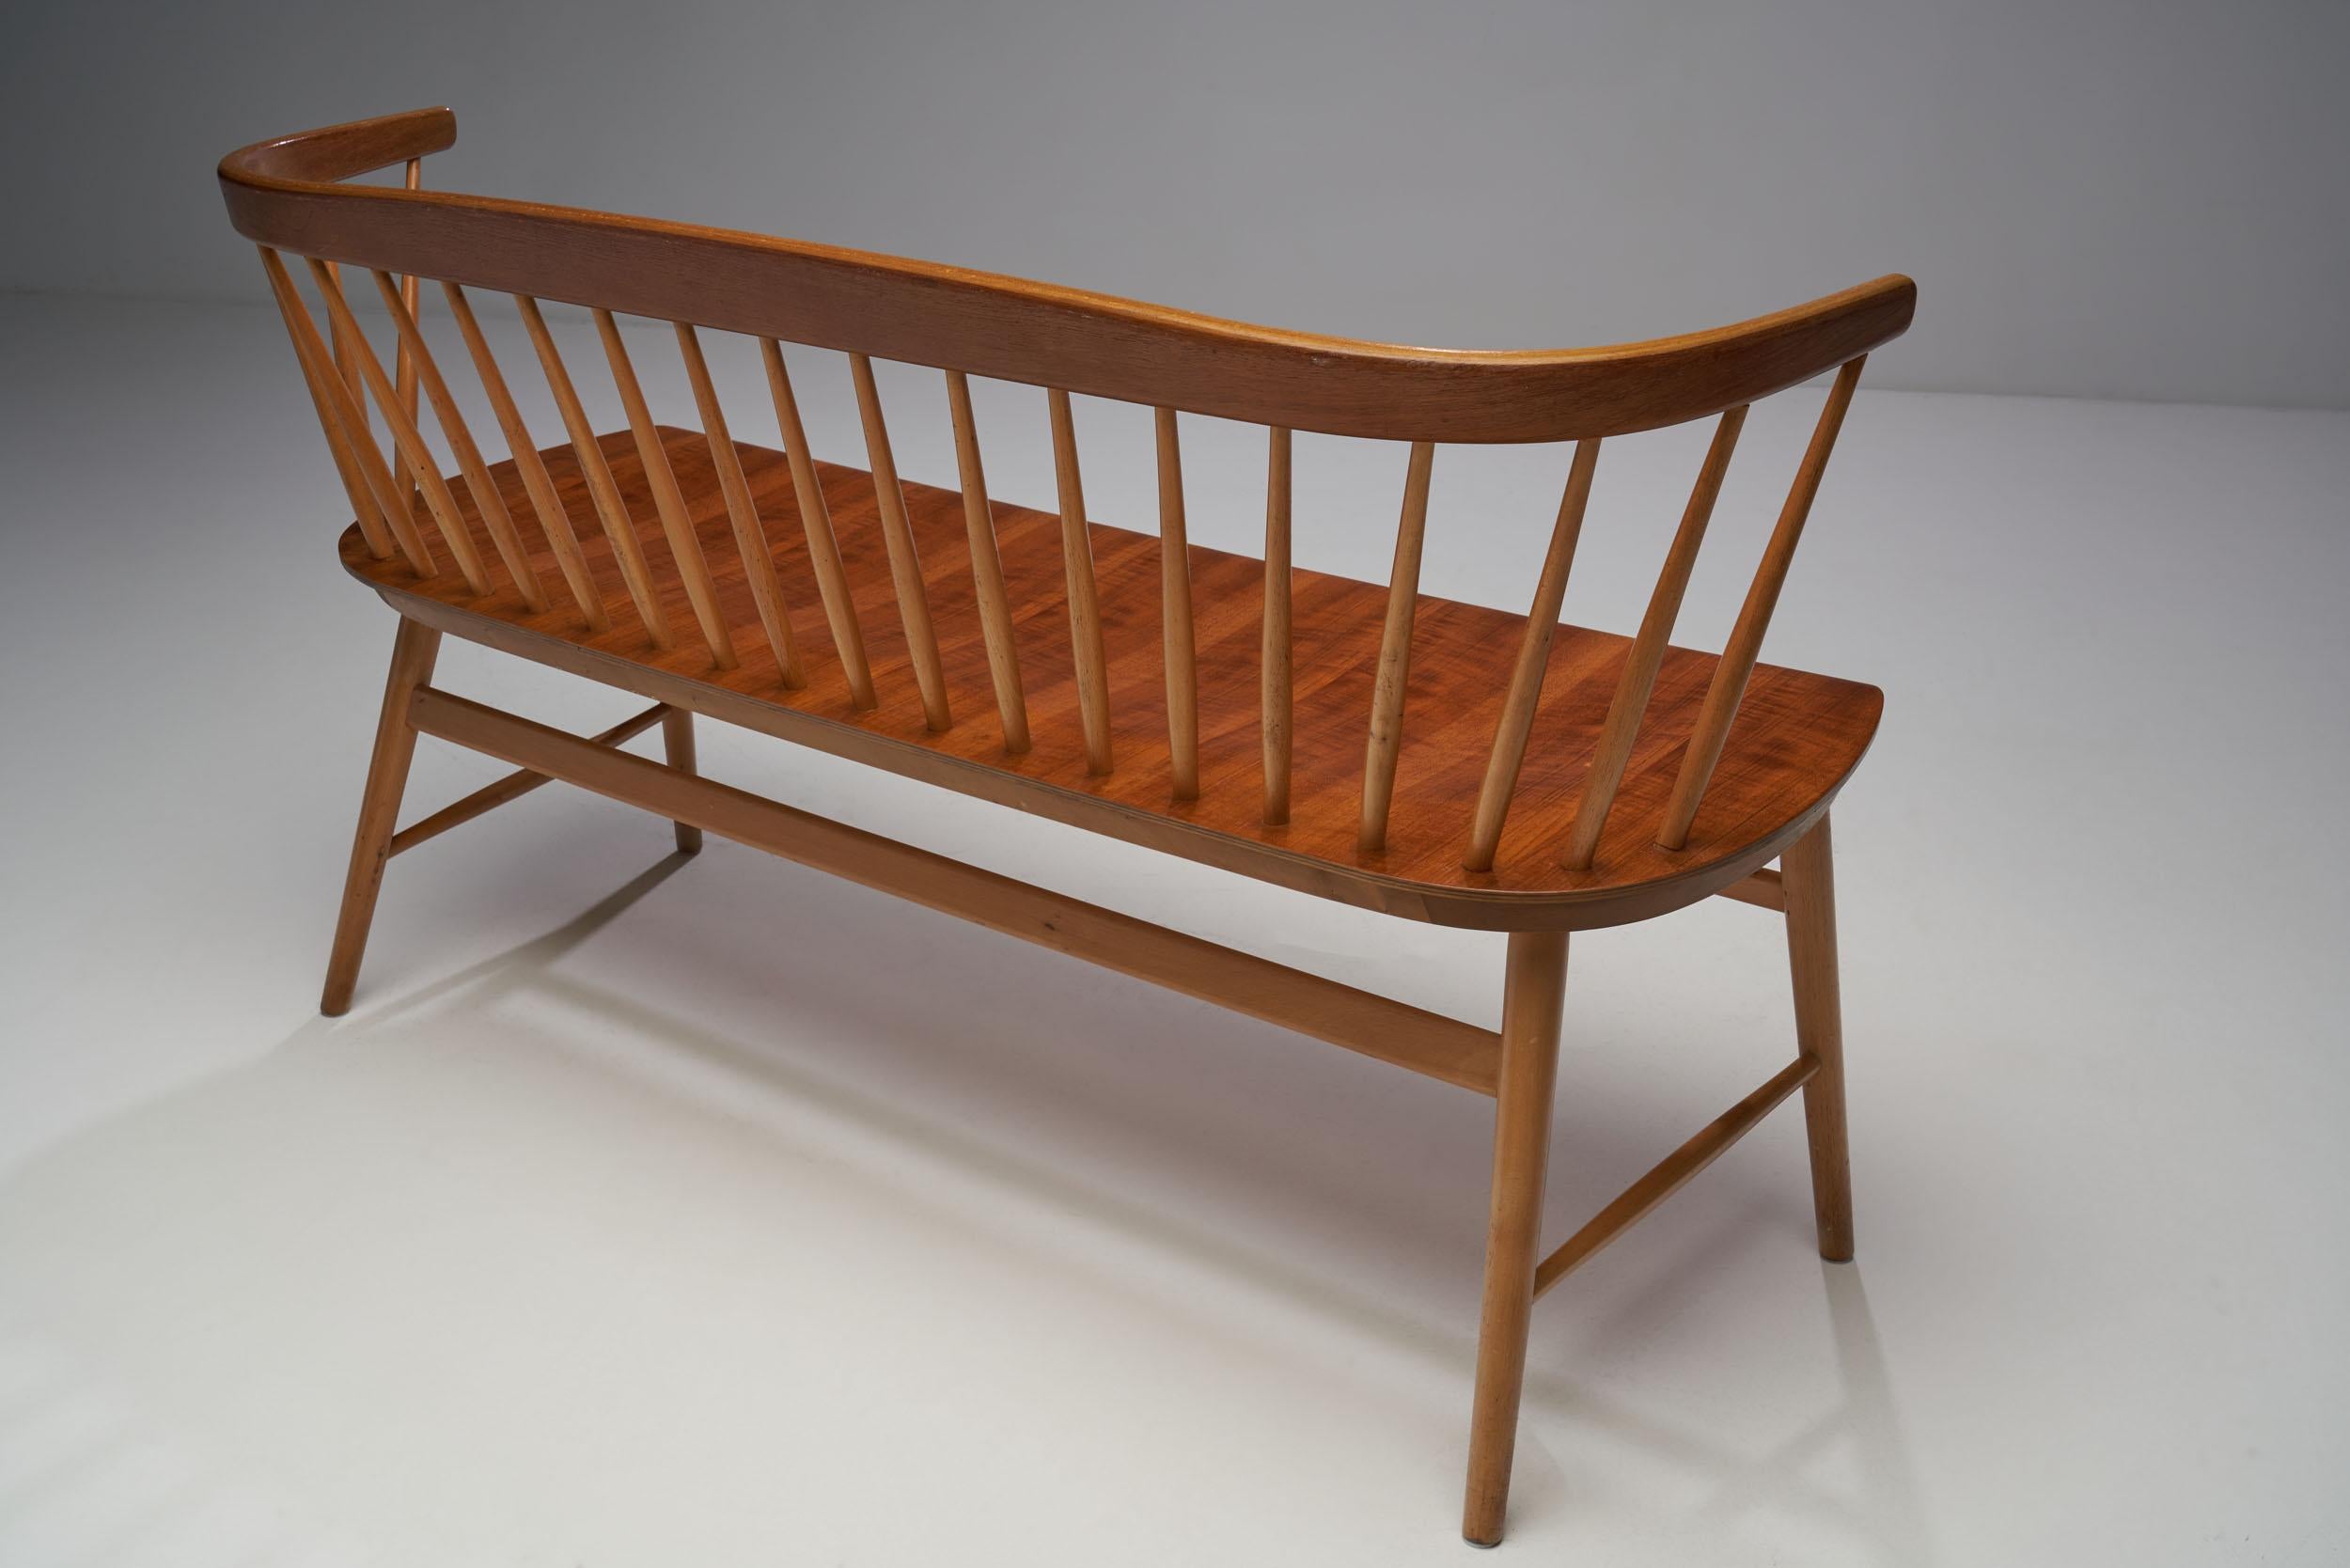 Mid-20th Century “Florida” Bench by Ebbe Wigell for AB Bröderna Wigells Stolfabrik, Sweden 1950s For Sale